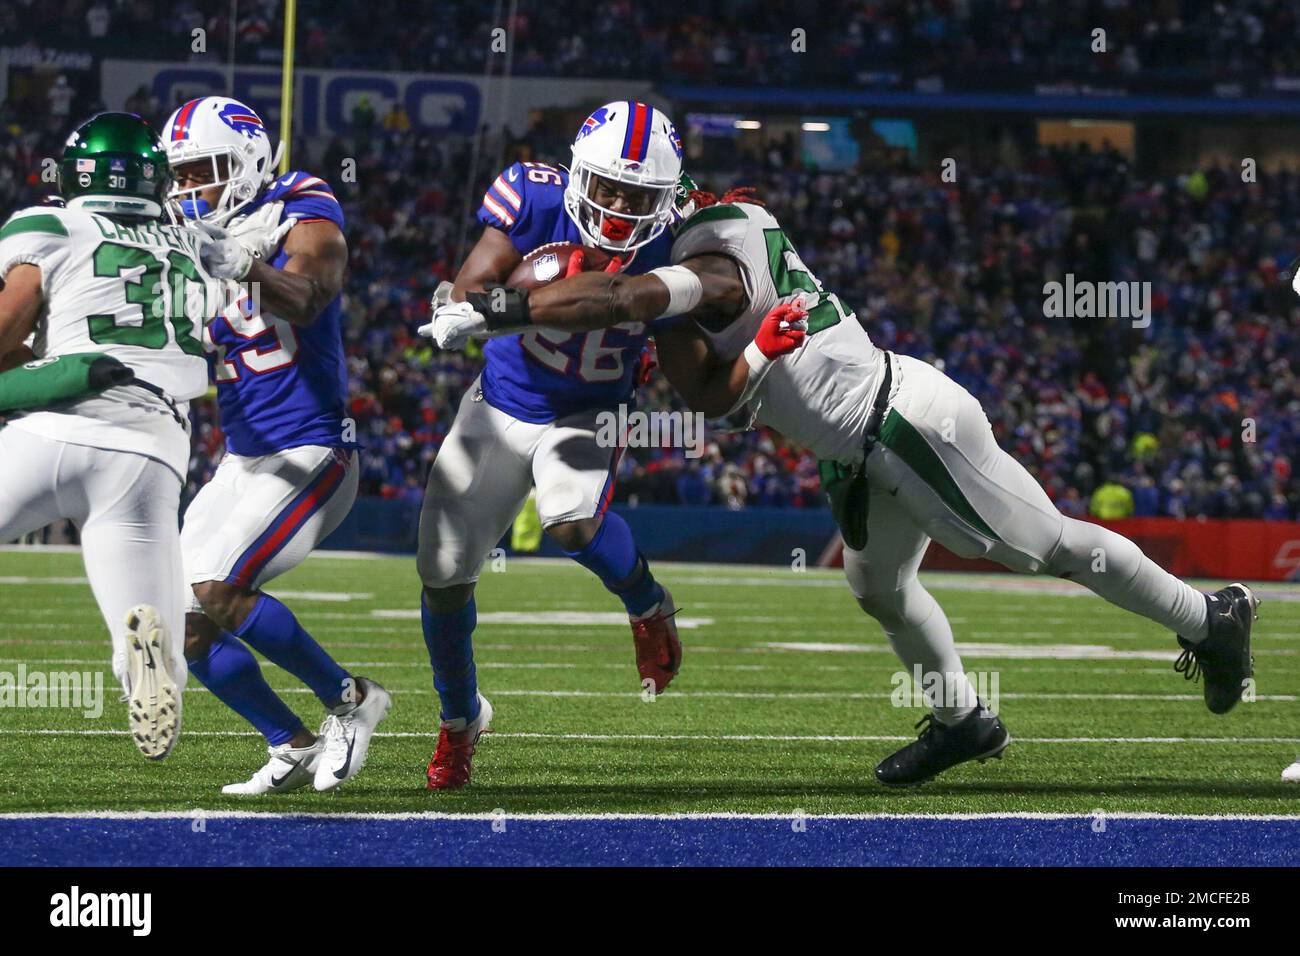 Buffalo Bills' Devin Singletary (26) scores a touchdown during the second  half of an NFL football